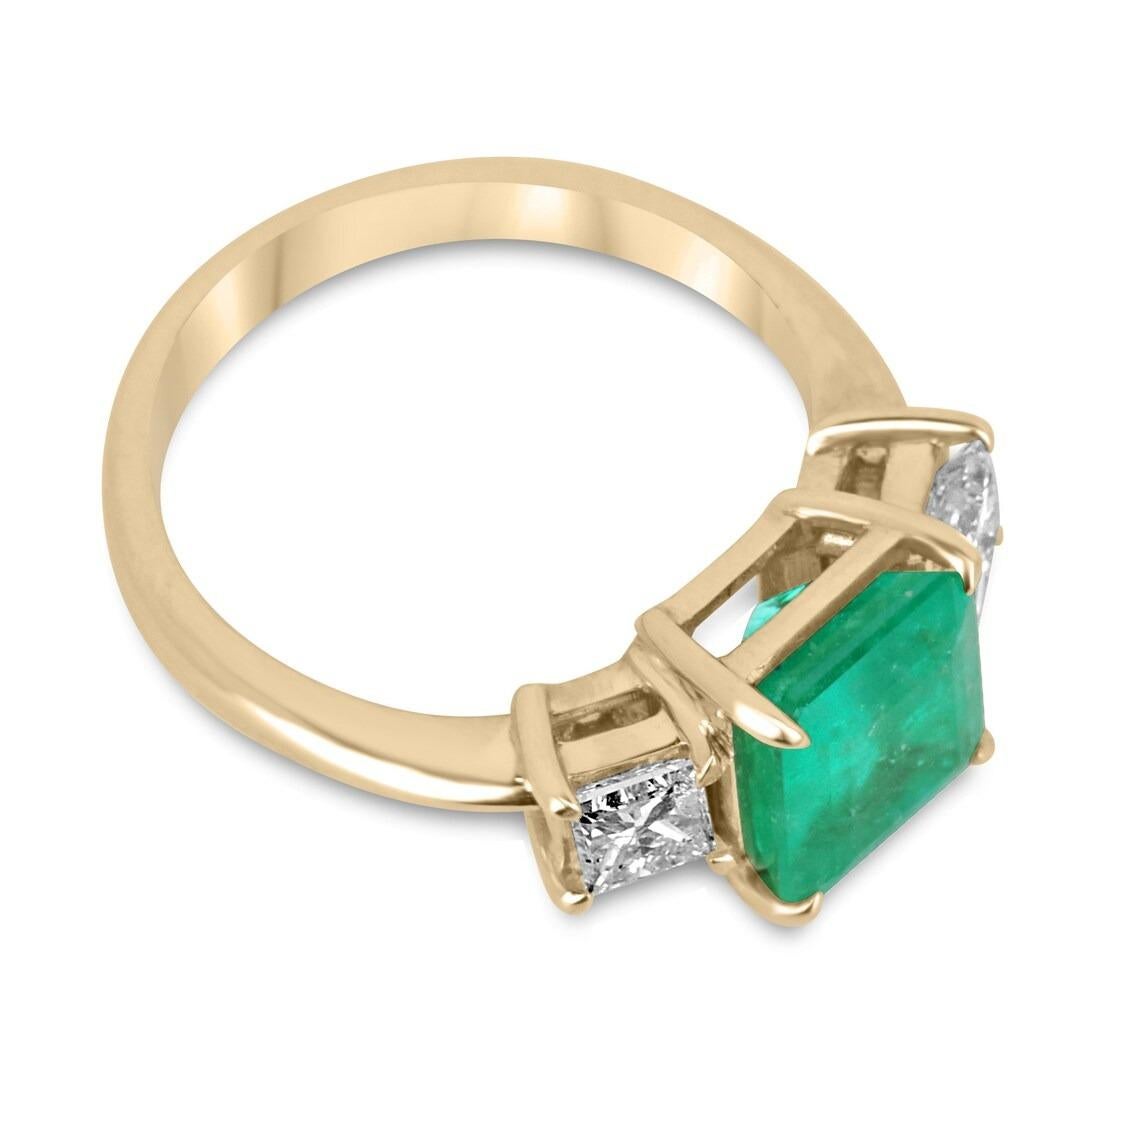 Indulge in the timeless allure of Colombian emeralds and diamonds with this breathtaking engagement, statement, or right-hand ring. Expertly handcrafted in lustrous 14K gold, this masterpiece showcases a stunning 2.20-carat natural Colombian emerald